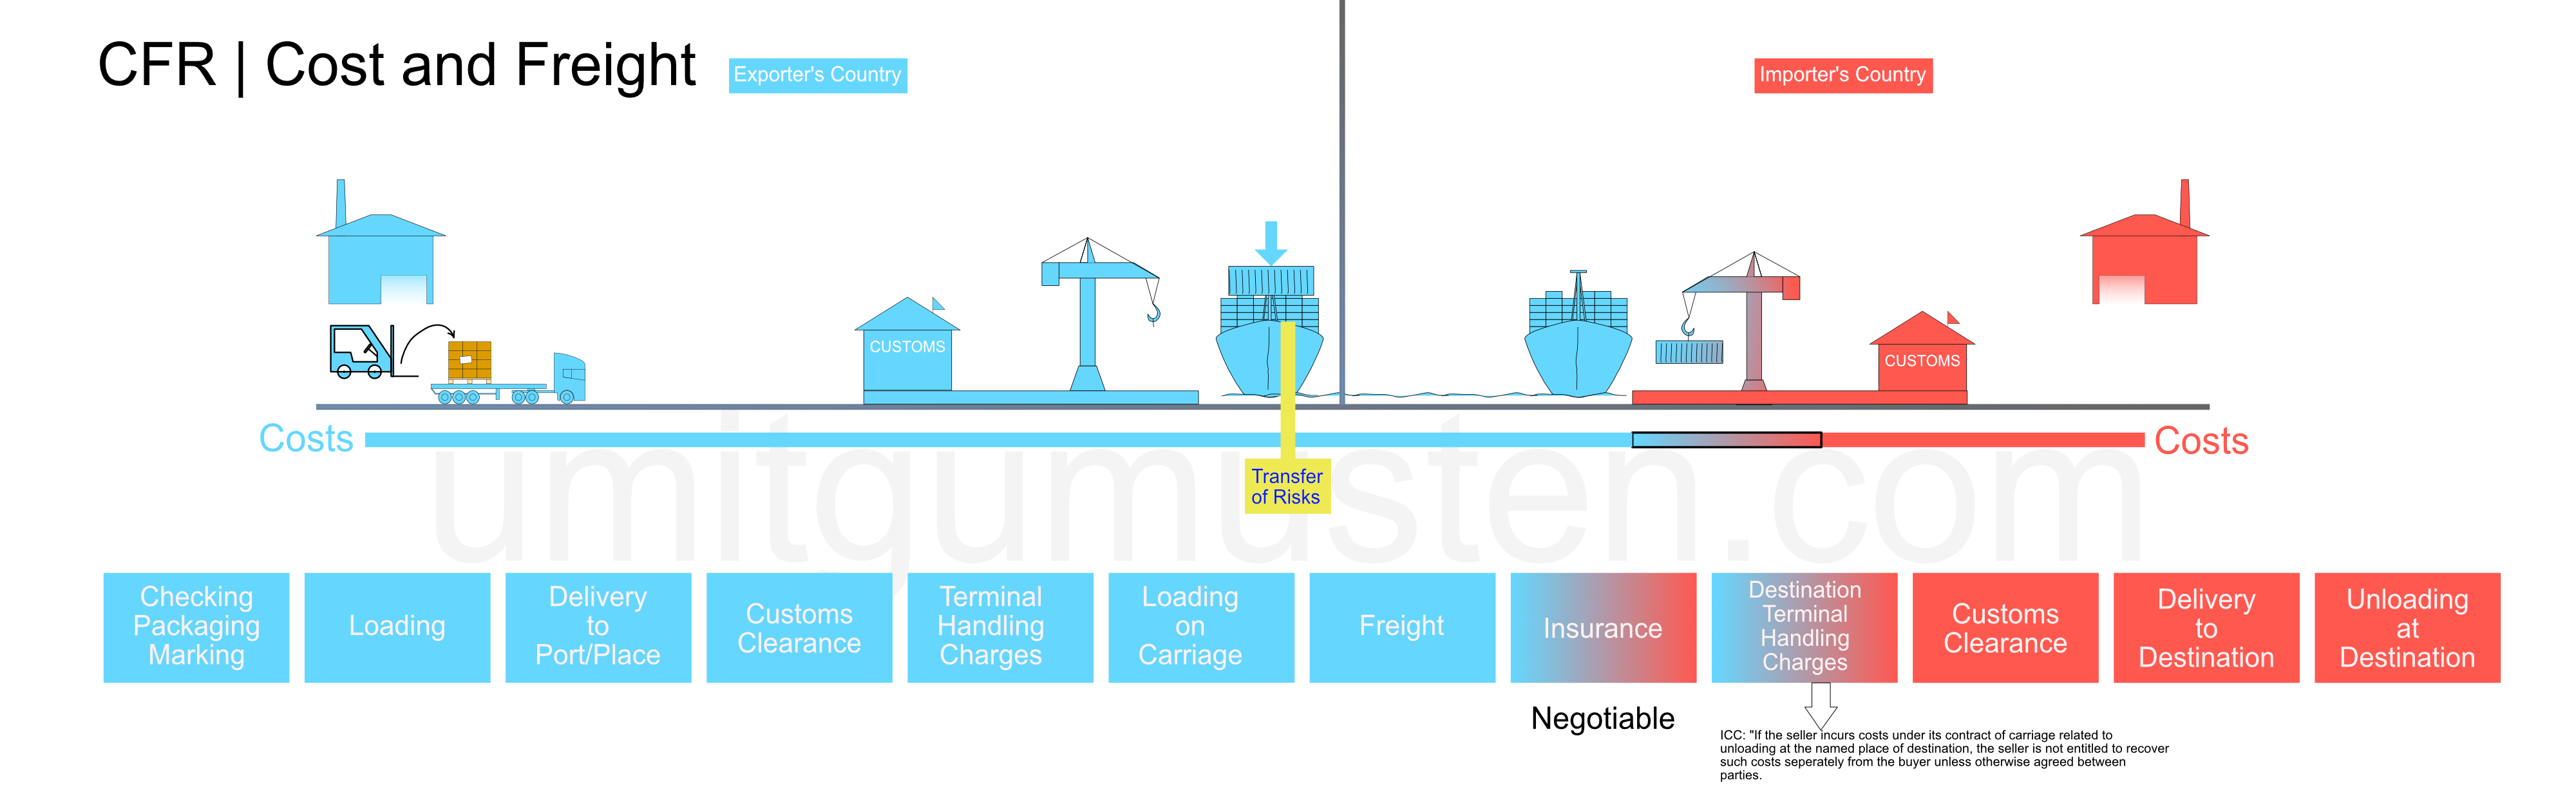 Cfr Incoterms 2020 Incoterms 2020 Explained The Complete Guide